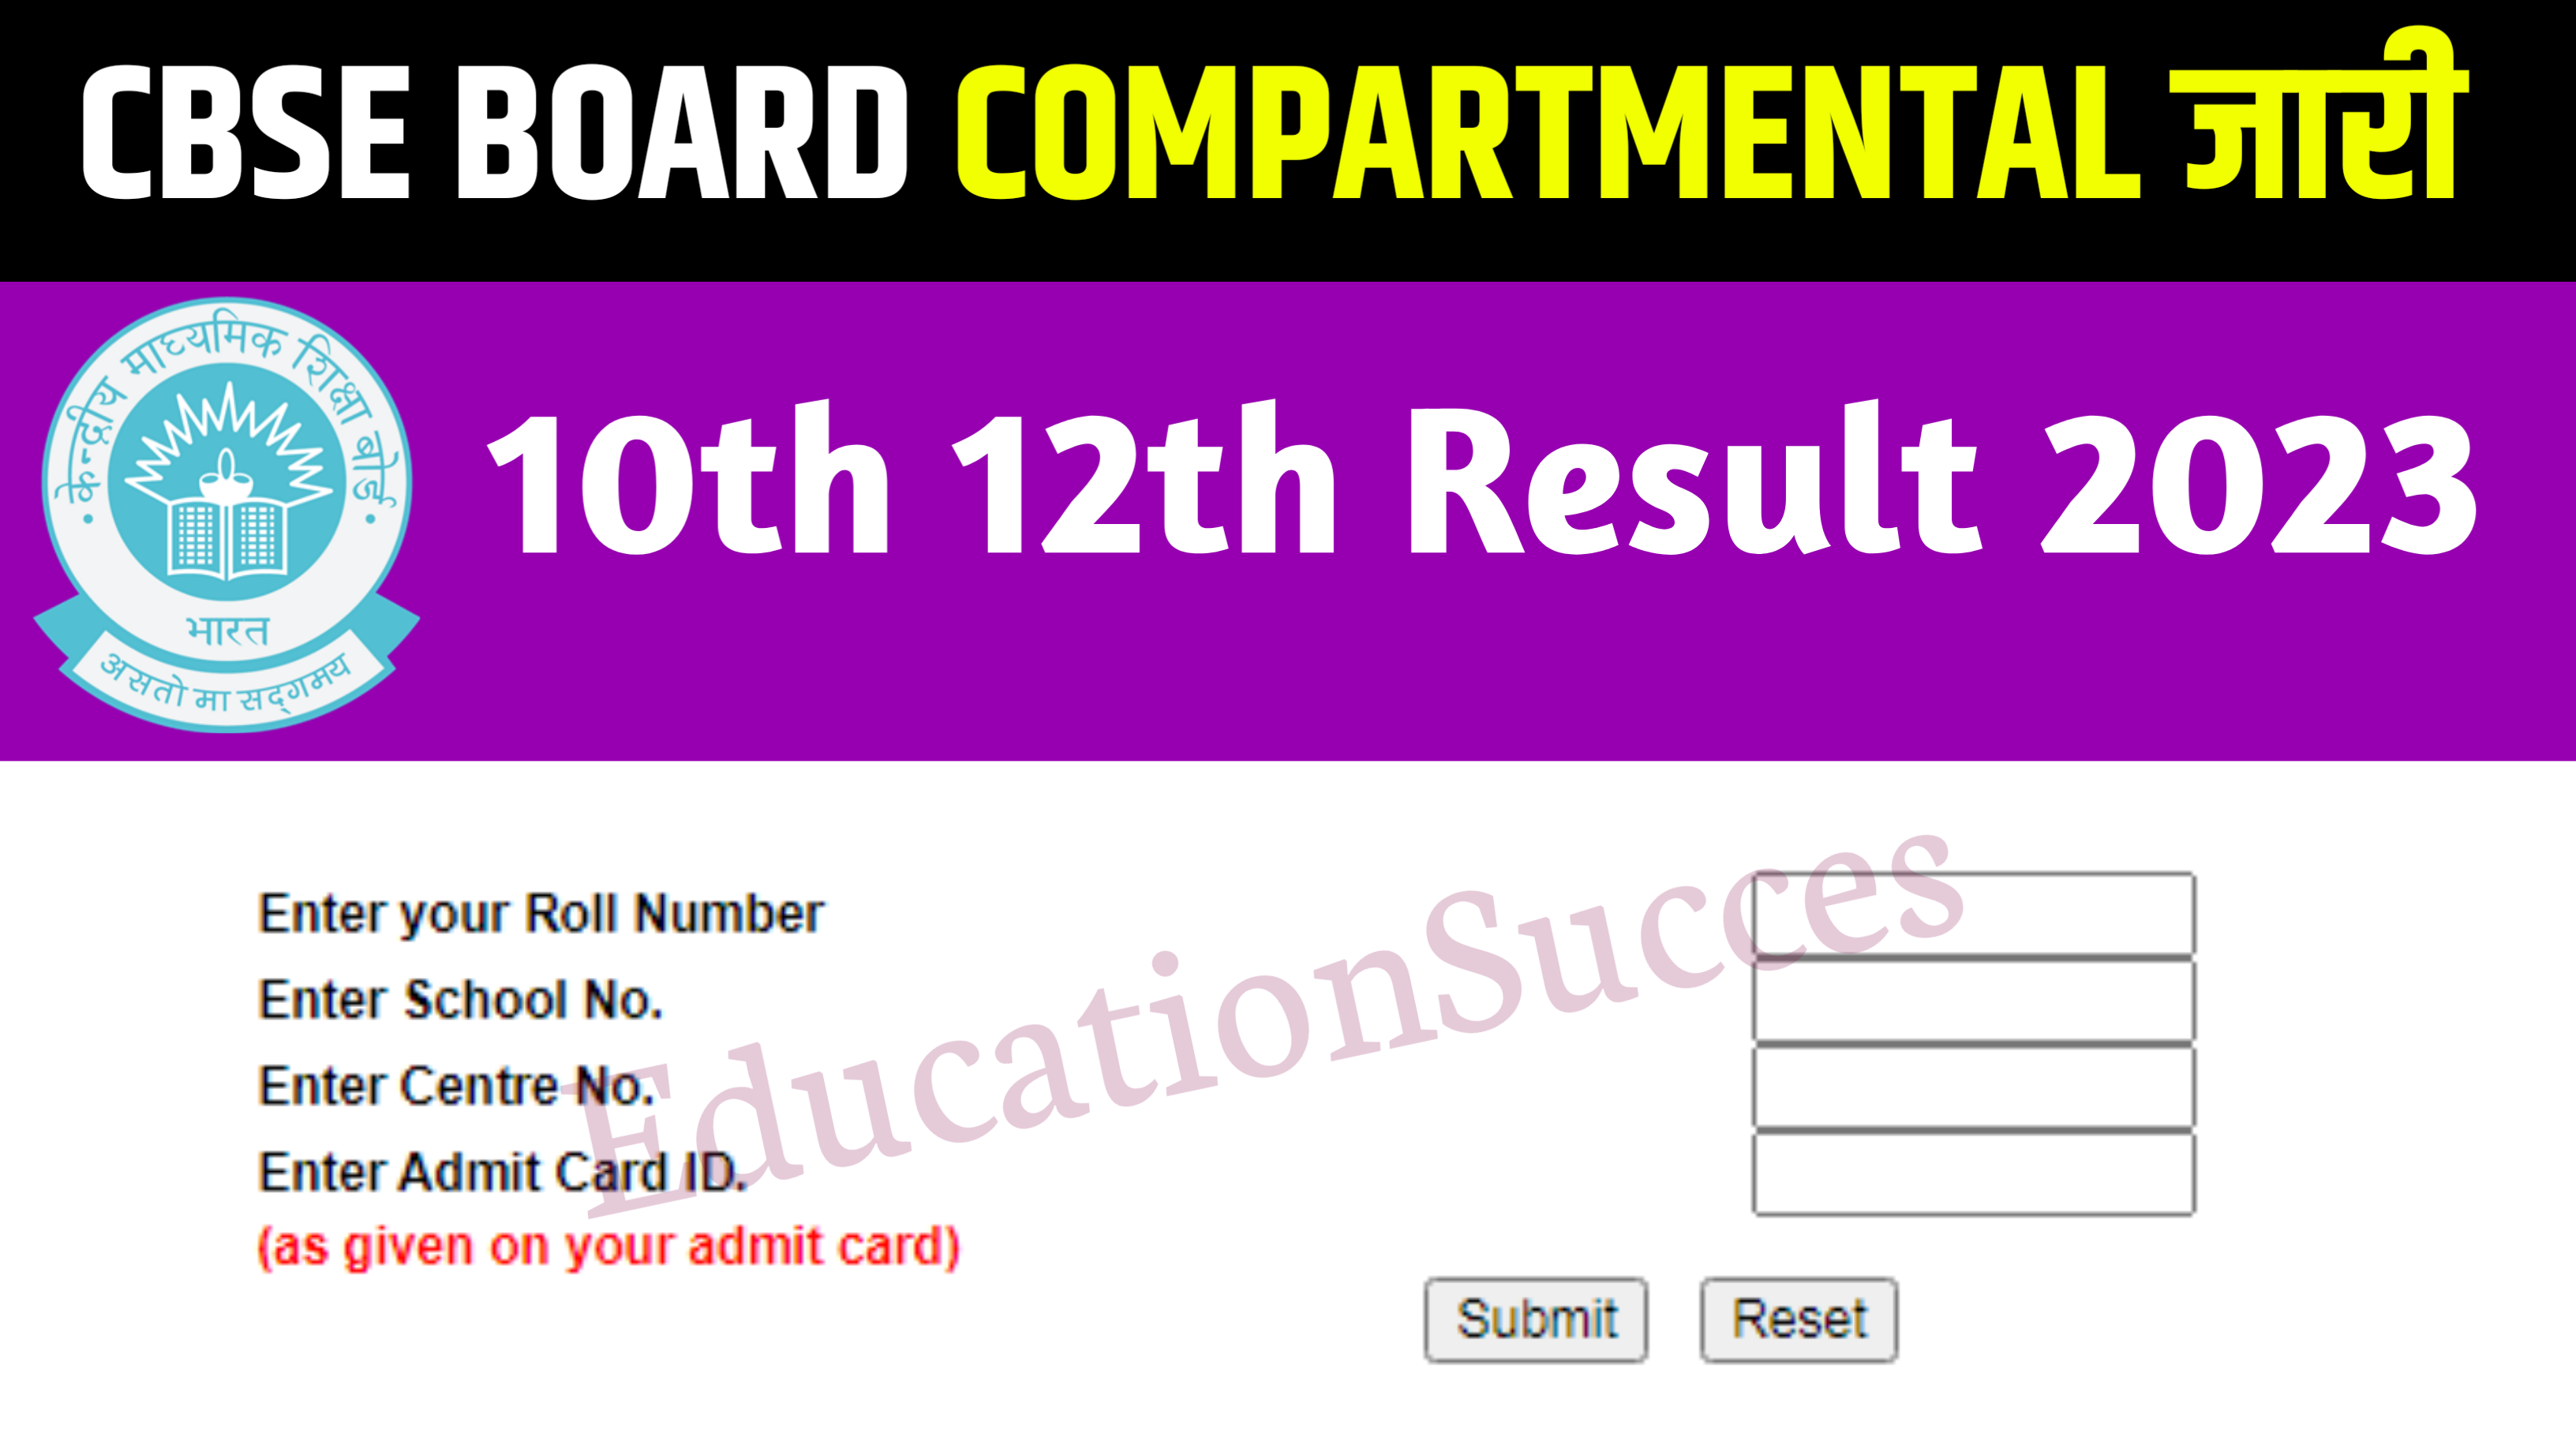 CBSE Board 10th 12th Compartmental Result Announced Today: